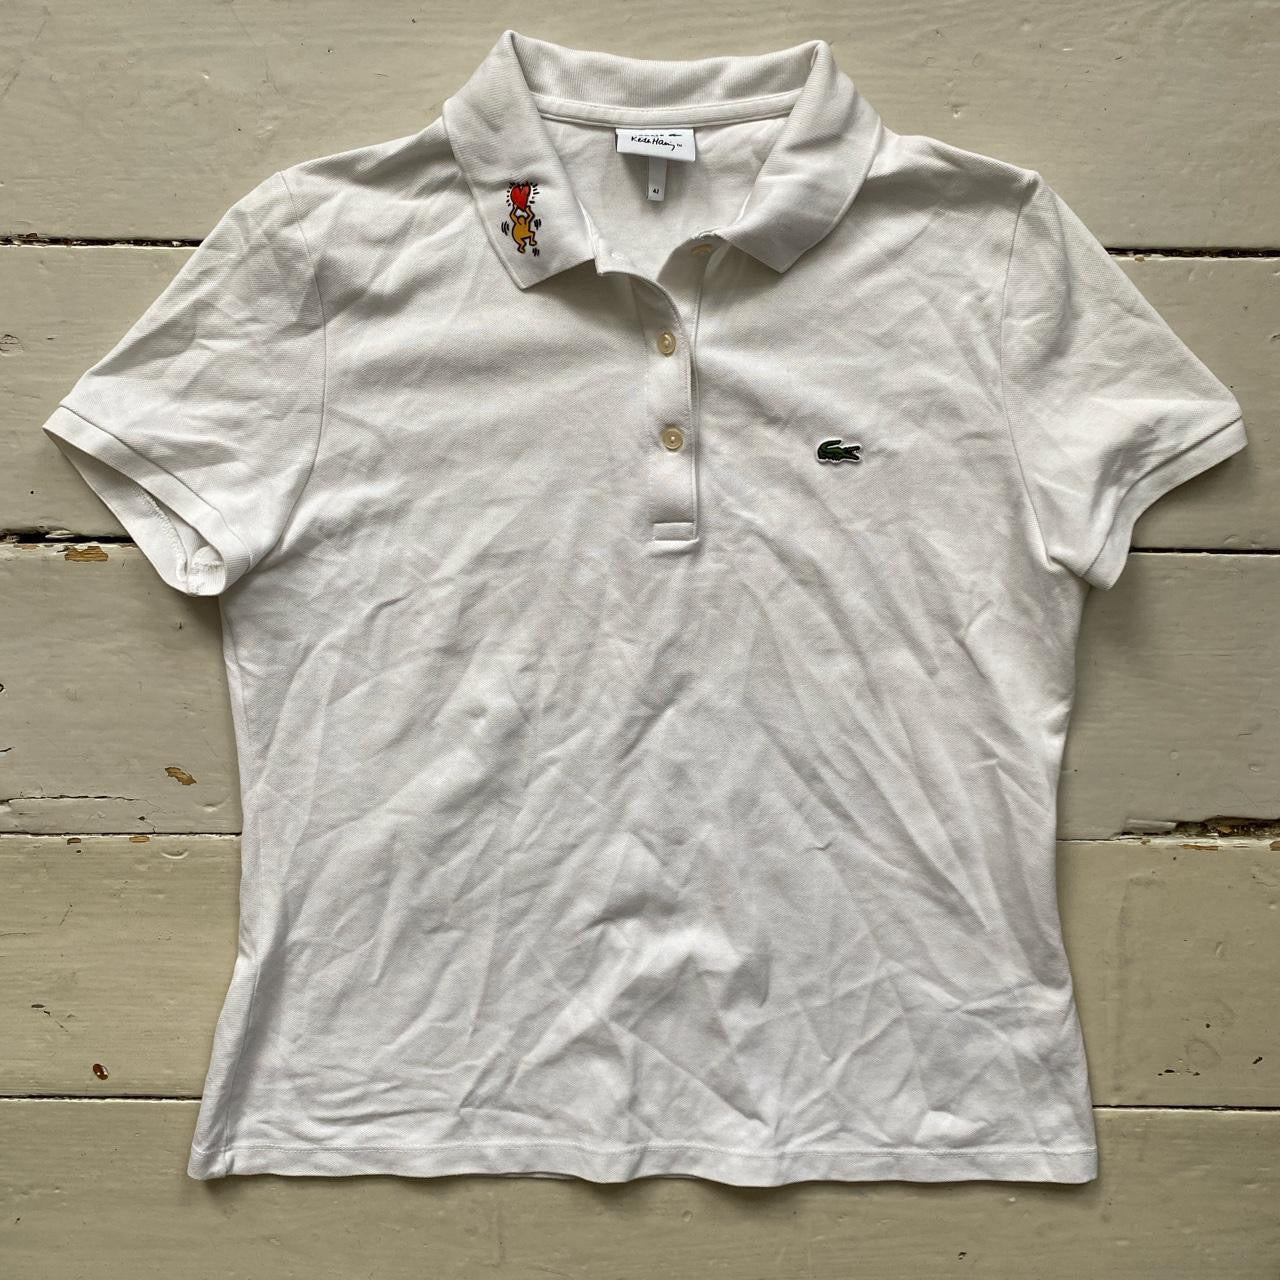 Lacoste Keith Haring White Womens Polo (Small)